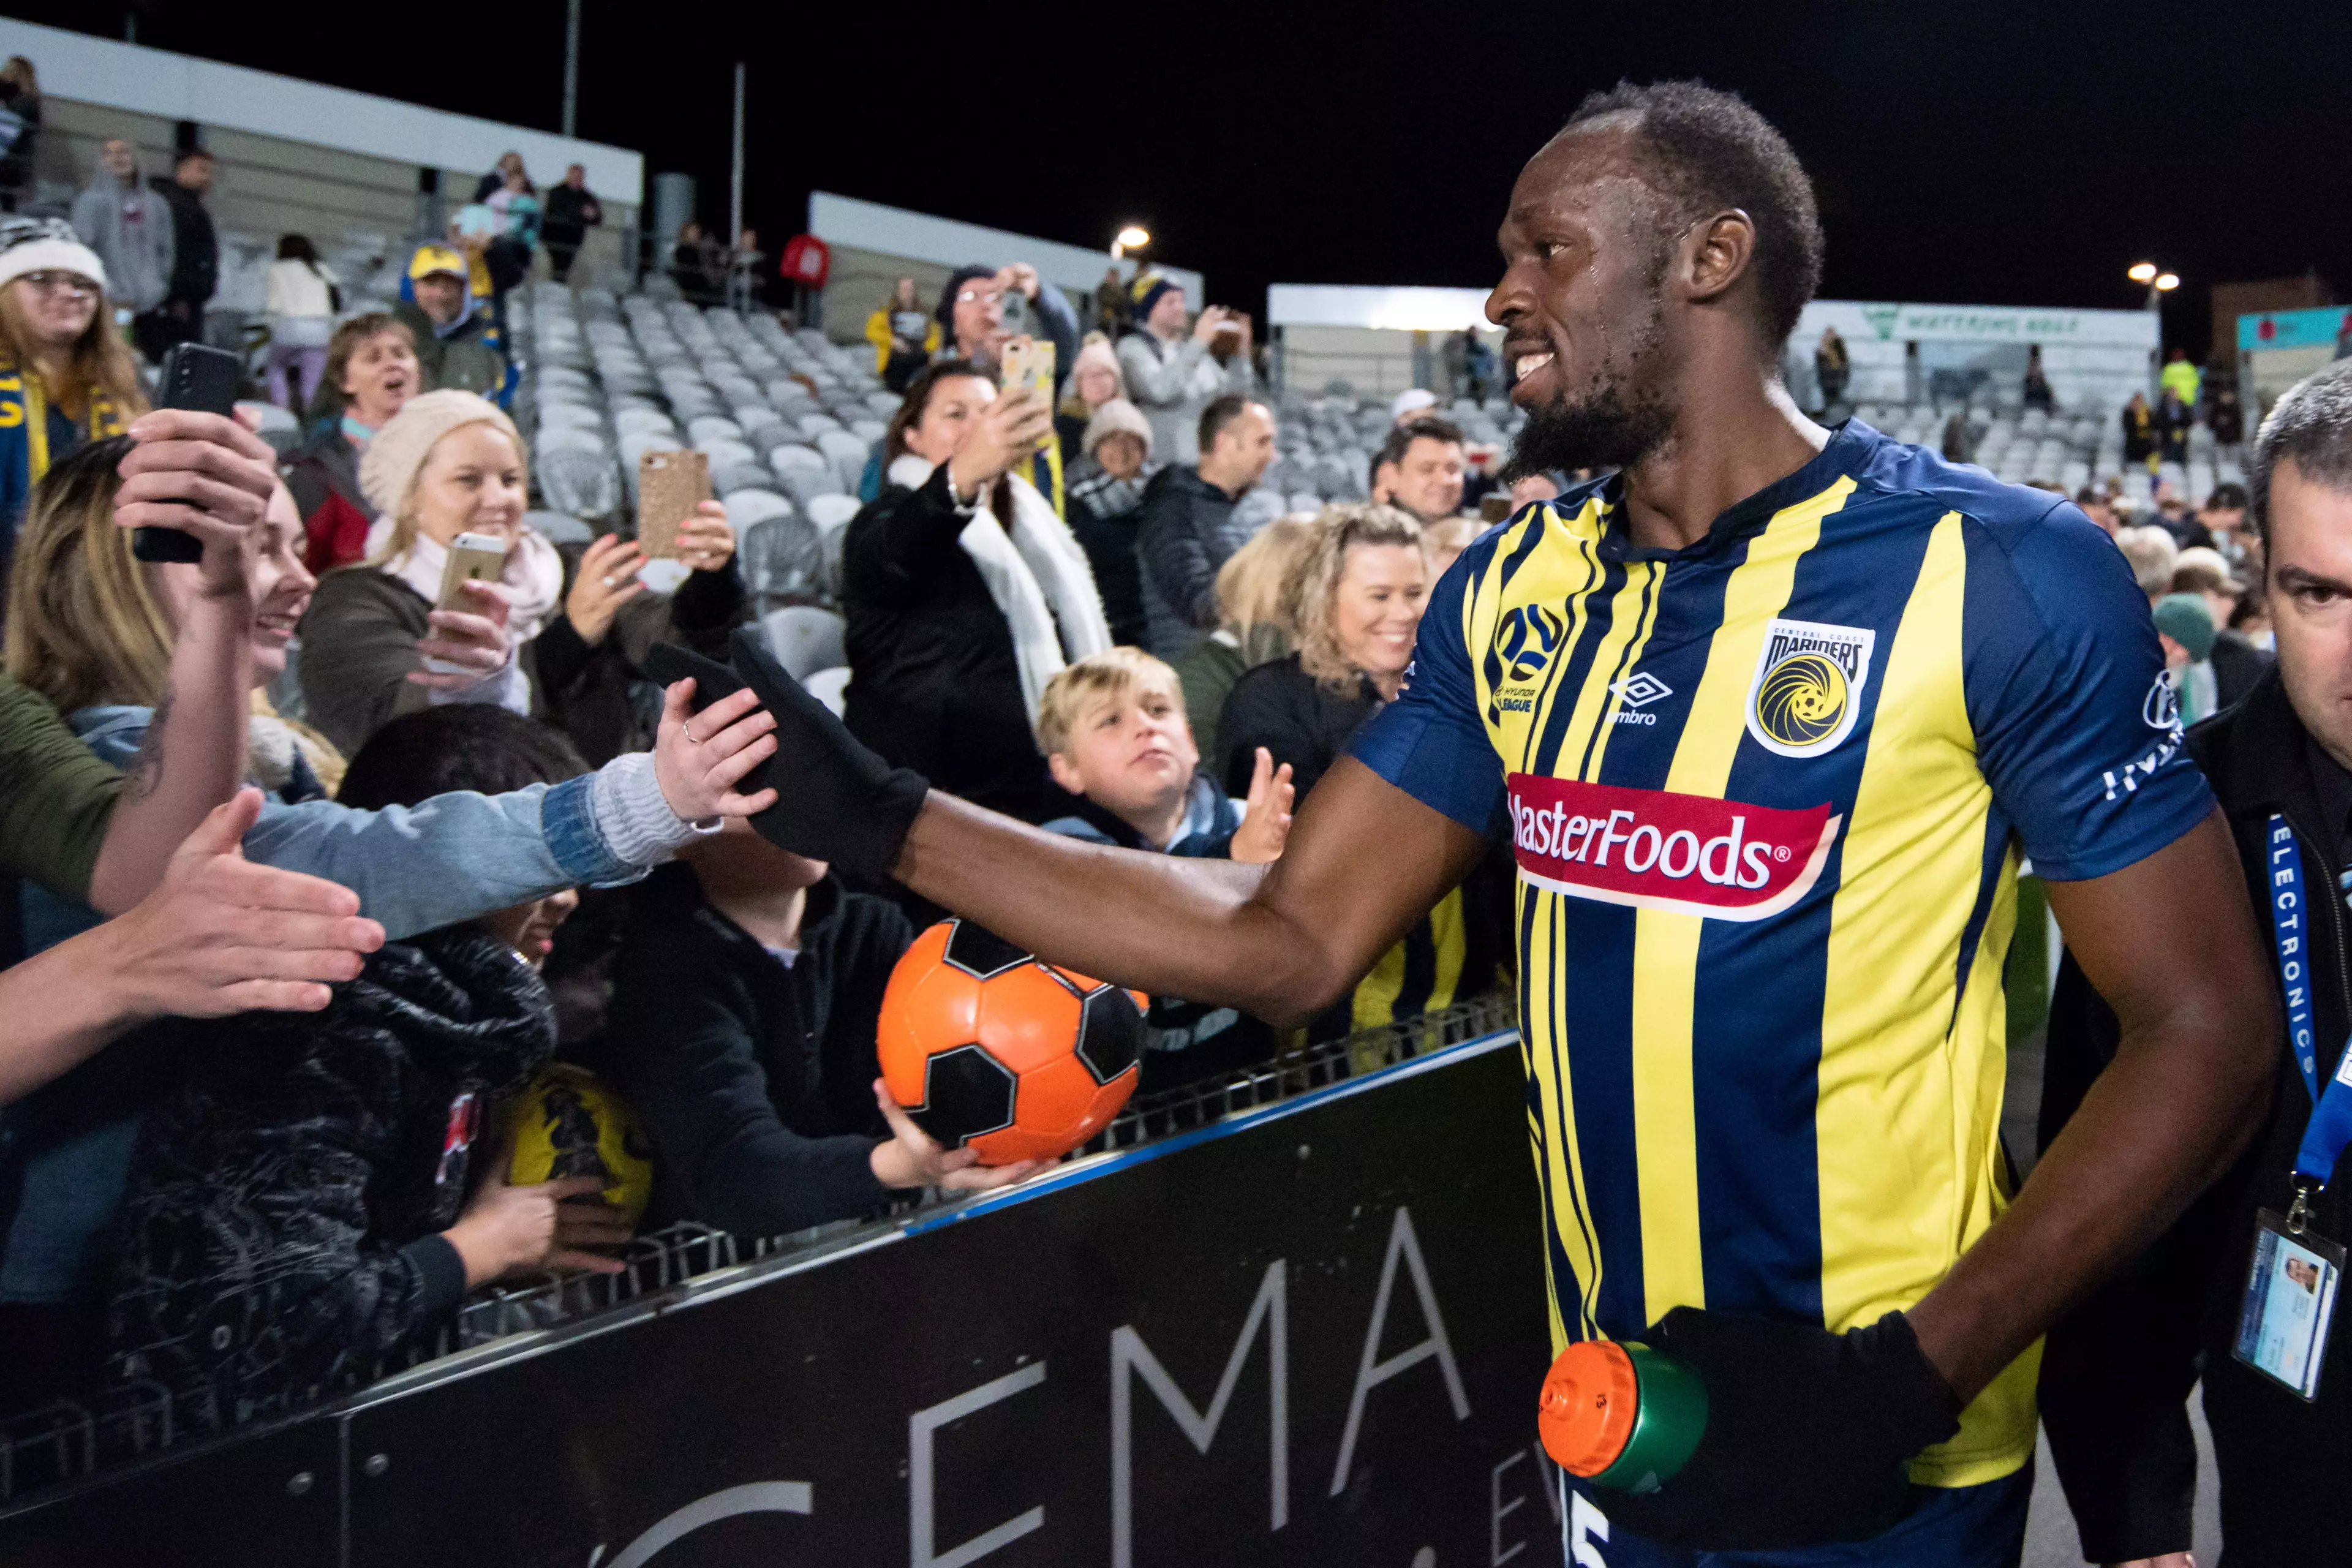 Bolt at the end of a game in August. Image: PA Images